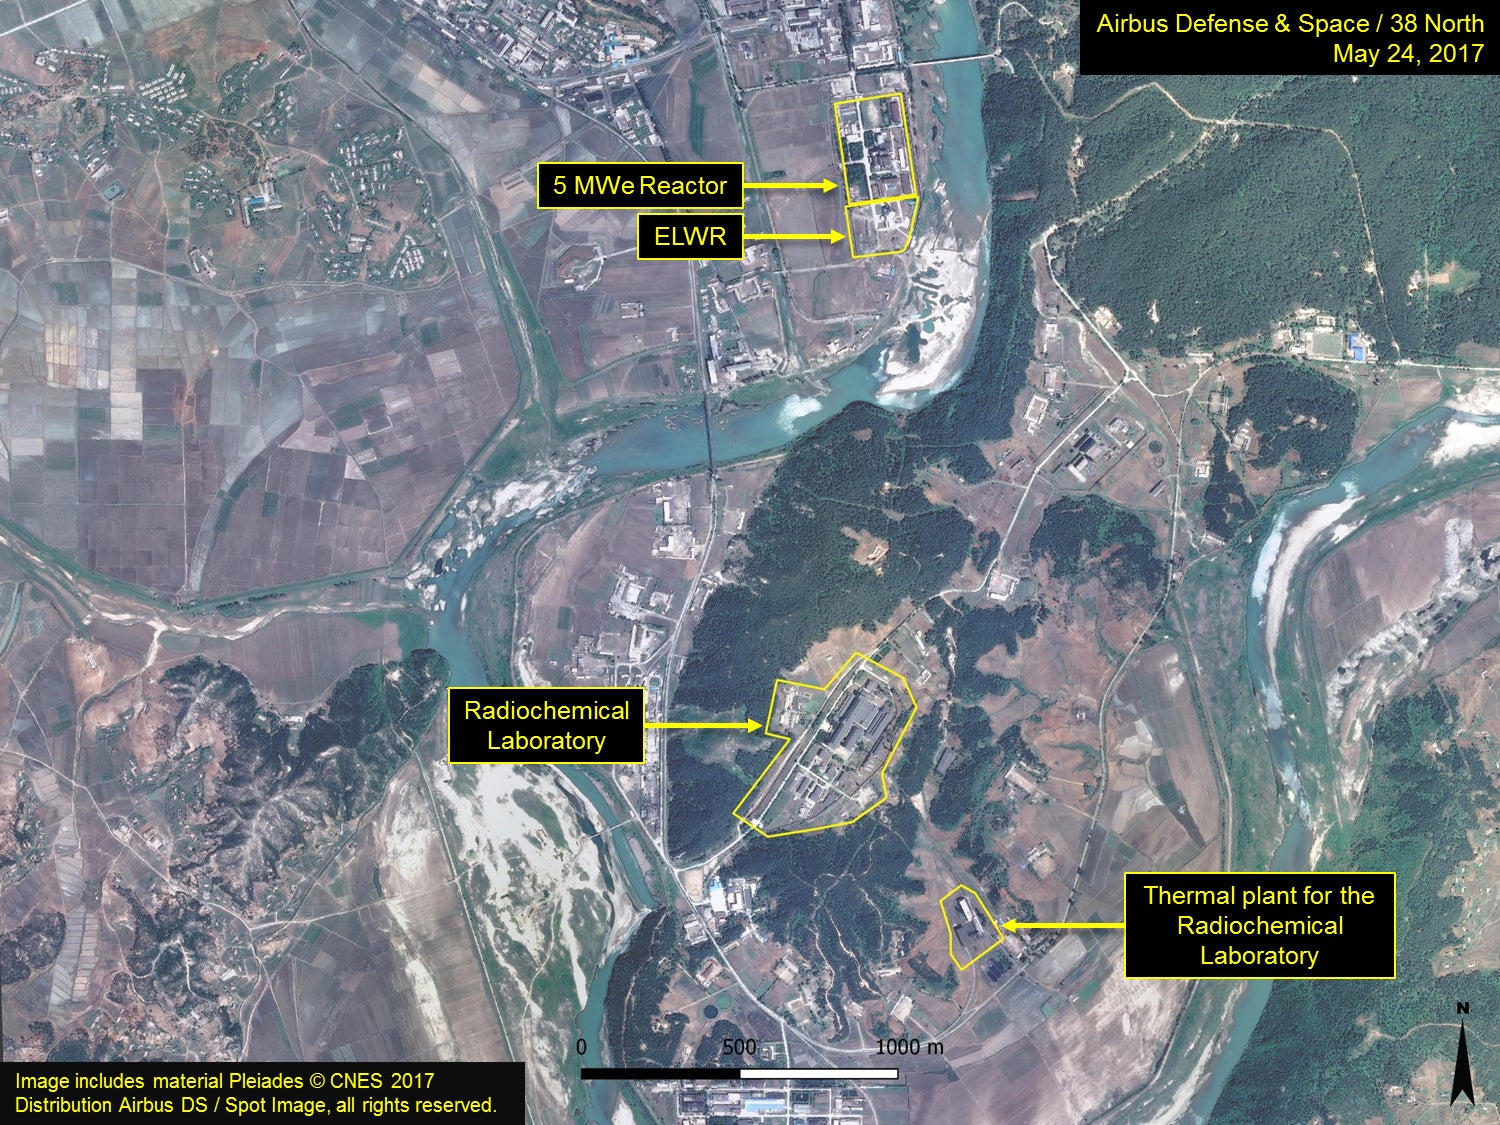 A satellite image of the Yongbyon nuclear plant in Nyongbyon County, 56 miles north of Pyongyang (Airbus Defense &amp;amp; Space and 38 North. Includes material Pleiades © CNES 2017 Distribution Airbus DS / Spot Image, all rights reserved)